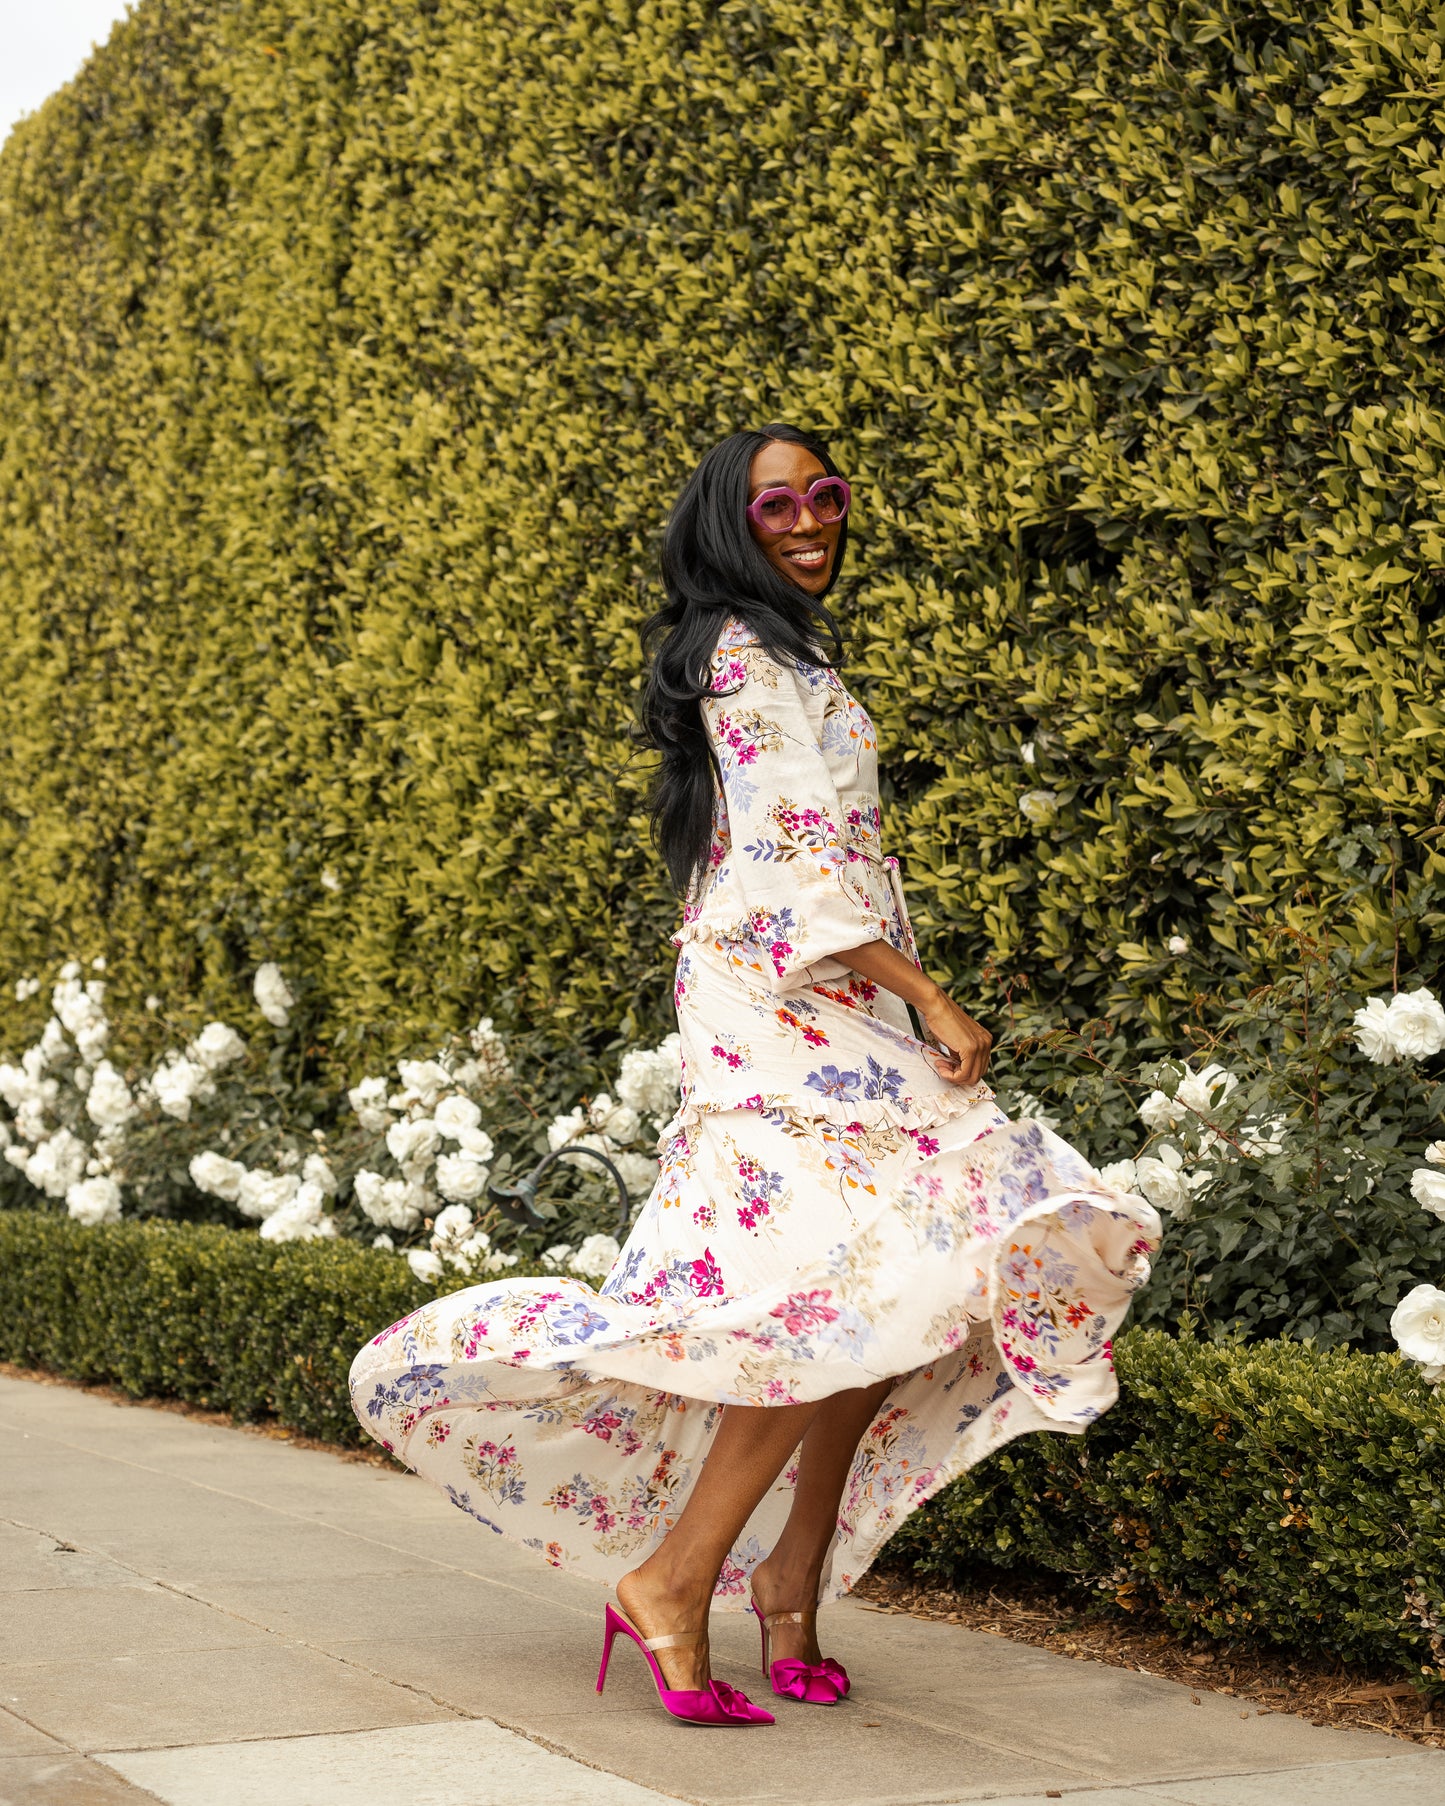 A floral maxi dress made from a soft, linen like crepe, it features high neck, bishop sleeves, tiered ruffle skirt and matching sash for a cinched waist. It's light, airy silhouette. Base color is pale yellow with a mixture of fuchsia, orange, and blue flowers as the print.